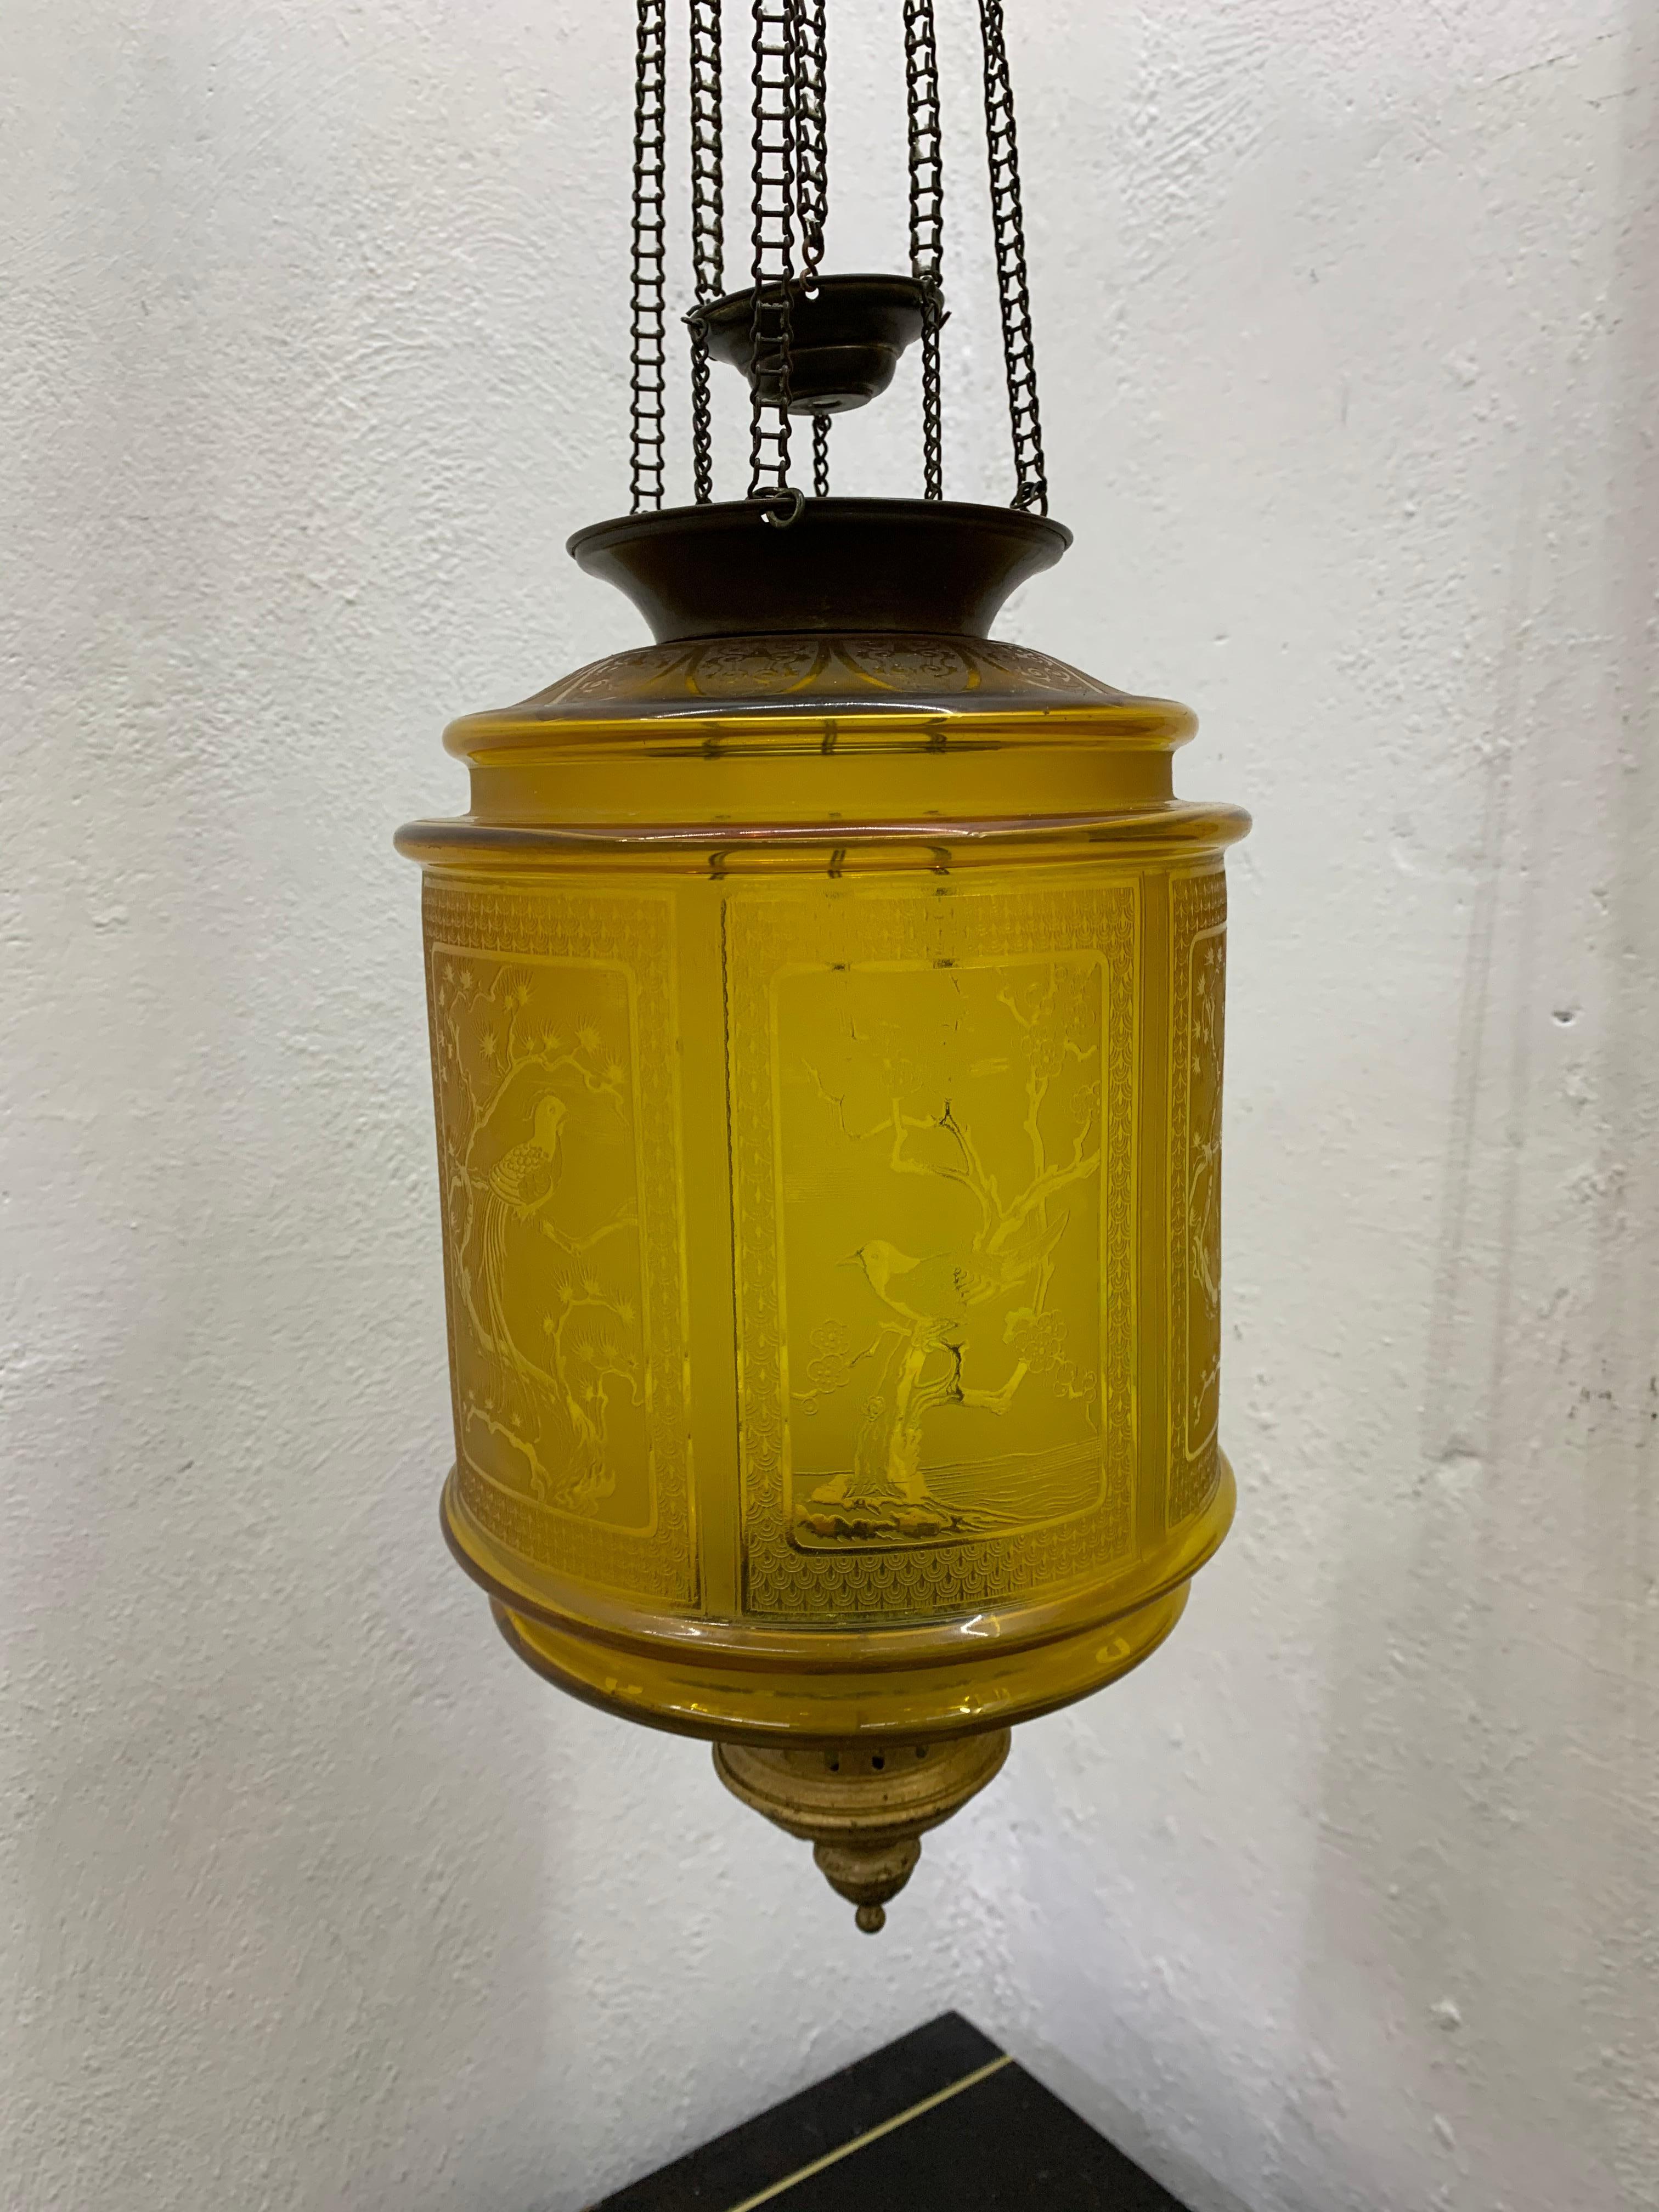 Amber Art Nouveau Candle Lantern by Baccarat France, Depicting Birds, circa 1890 For Sale 5